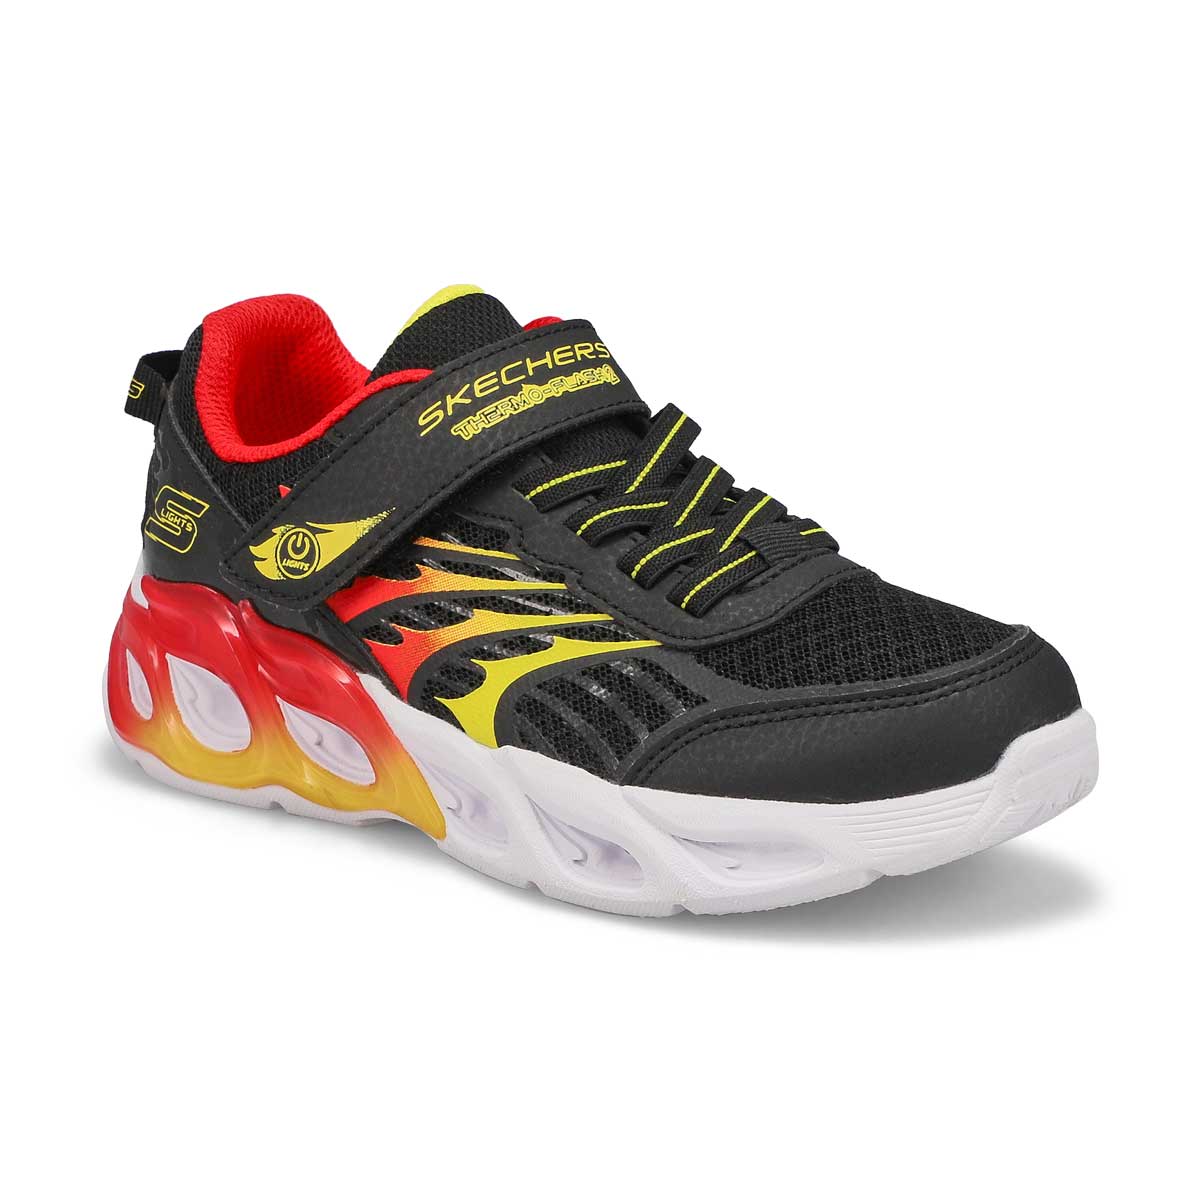 Boys Thermo-Flash 2.0 Sneaker - Black/Red